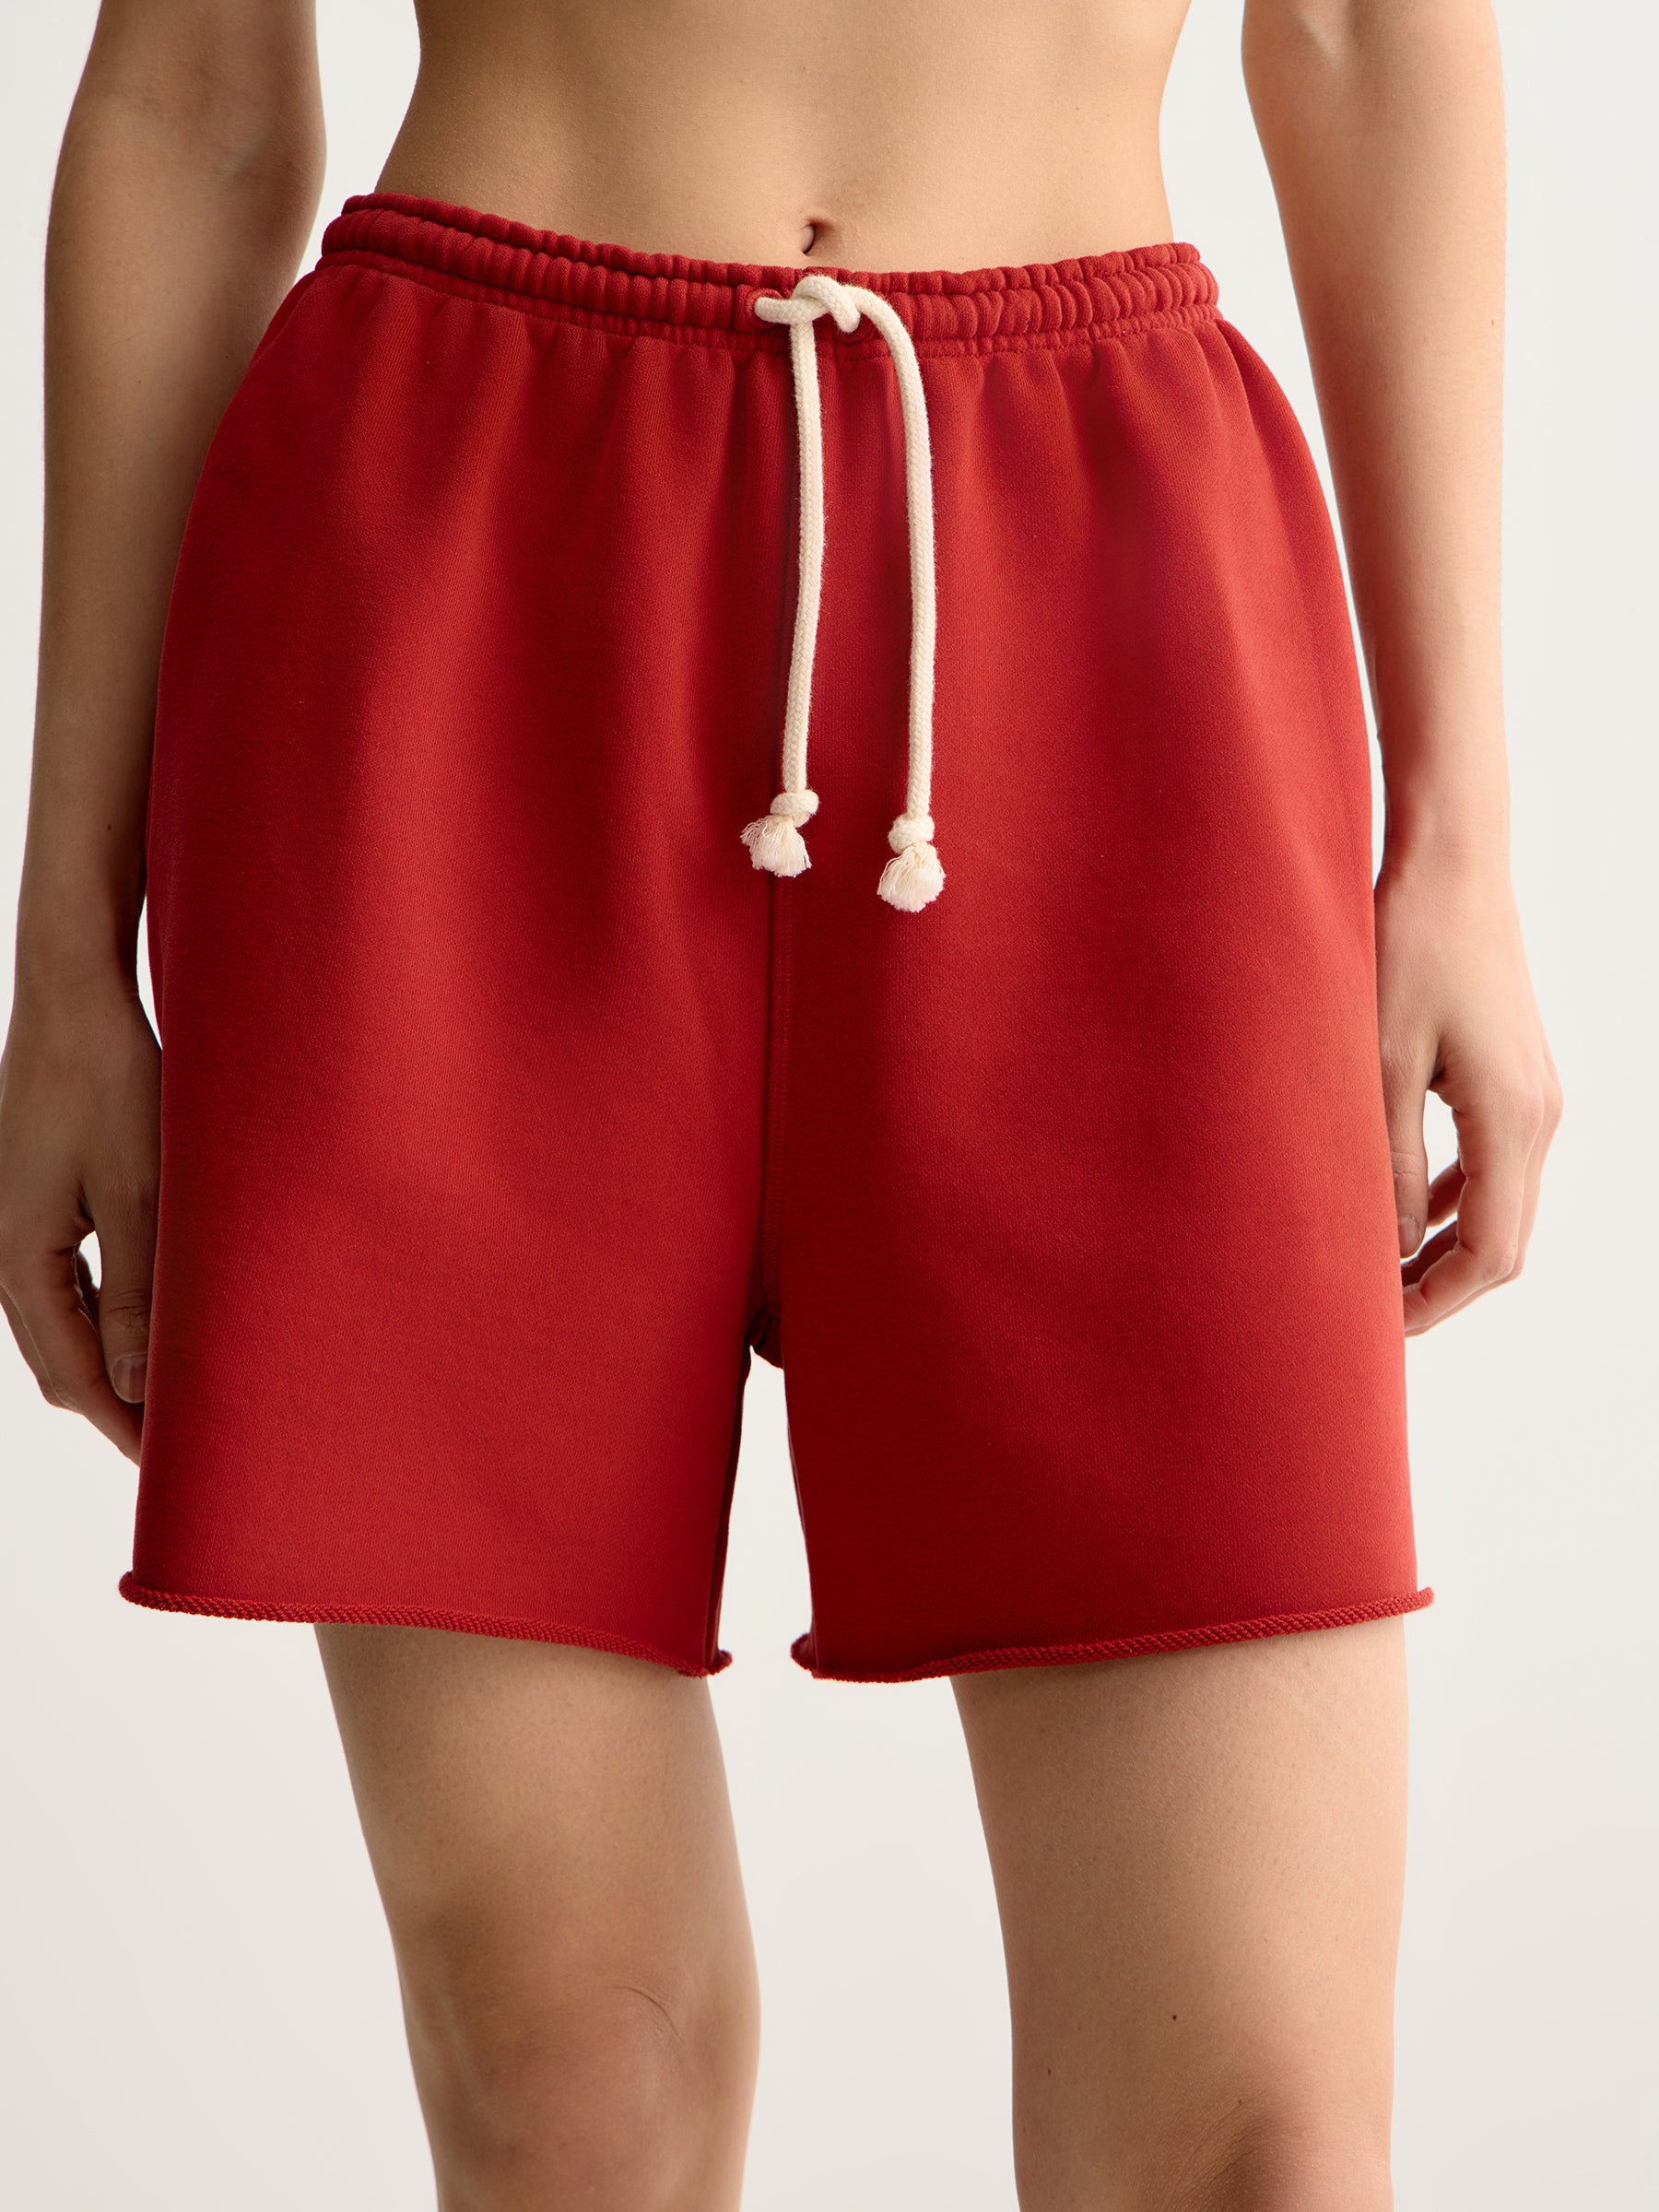 Terry shorts